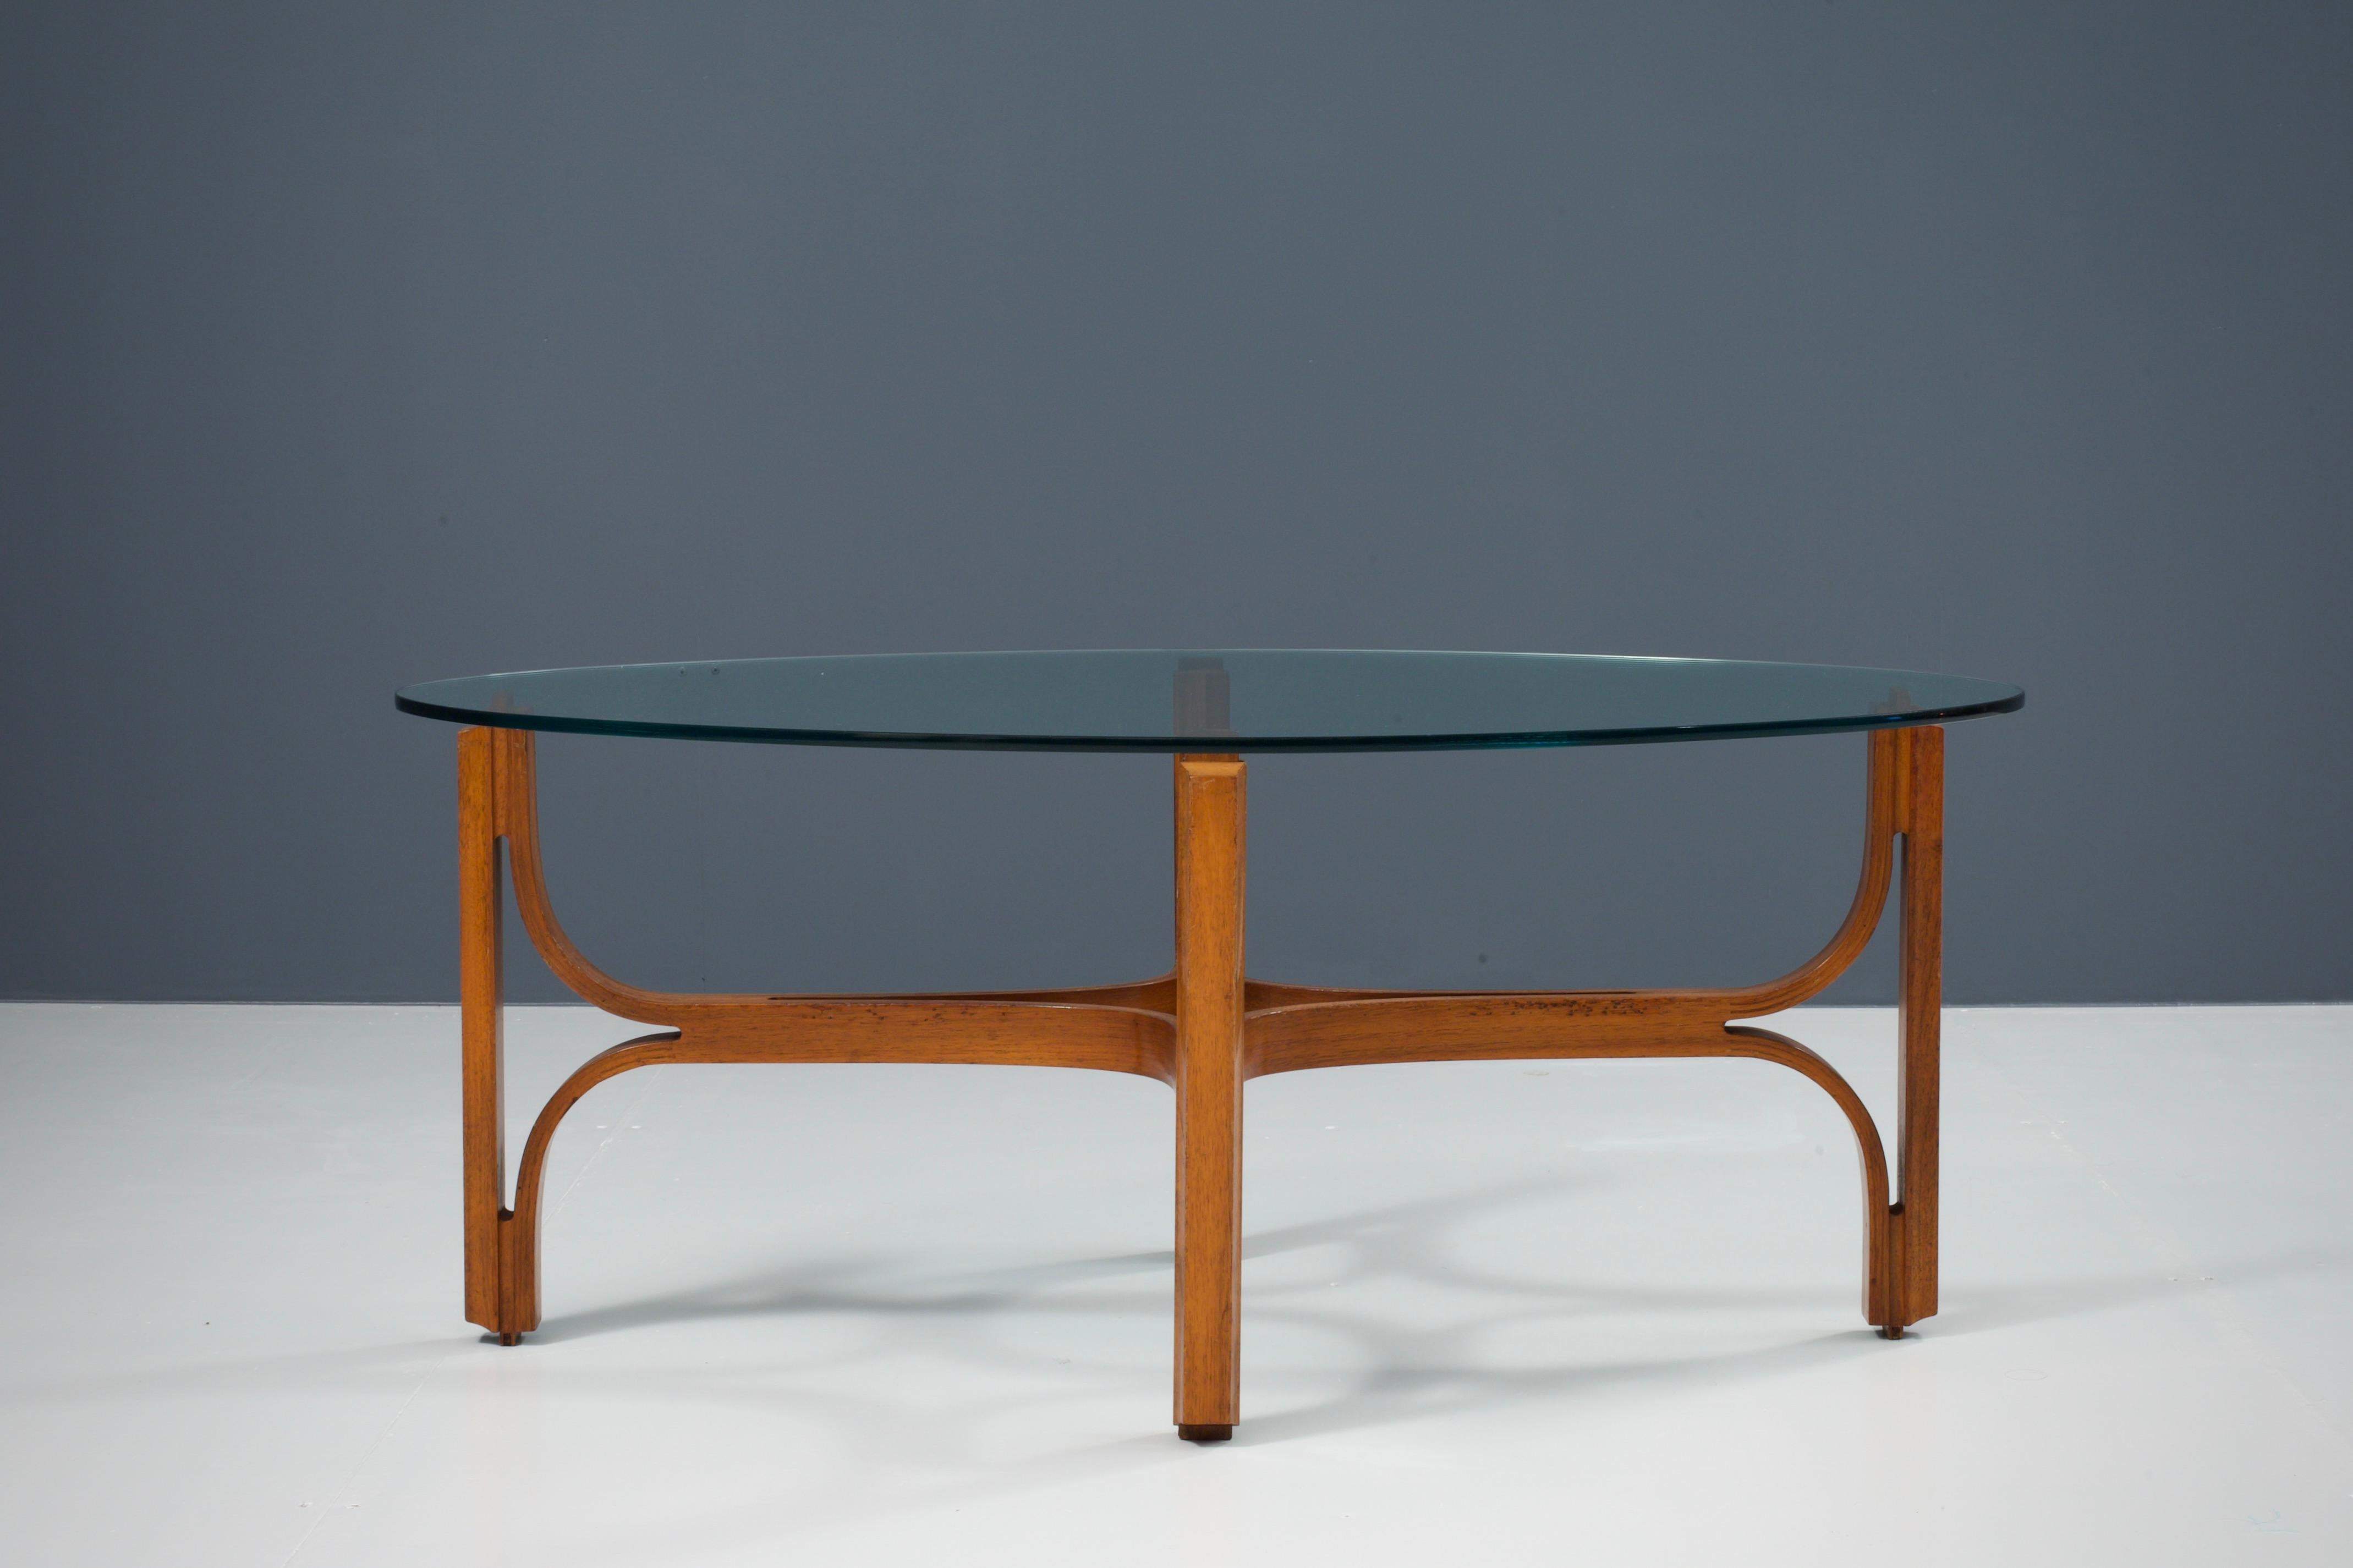 Coffee table in bended walnut and glass, Italy, 1960s

This organic shaped table is the work of true Italian craftsmanship. From above, through the oval shaped glass plate, an exceptional wooden construction is visible. It’s formed by ingeniously